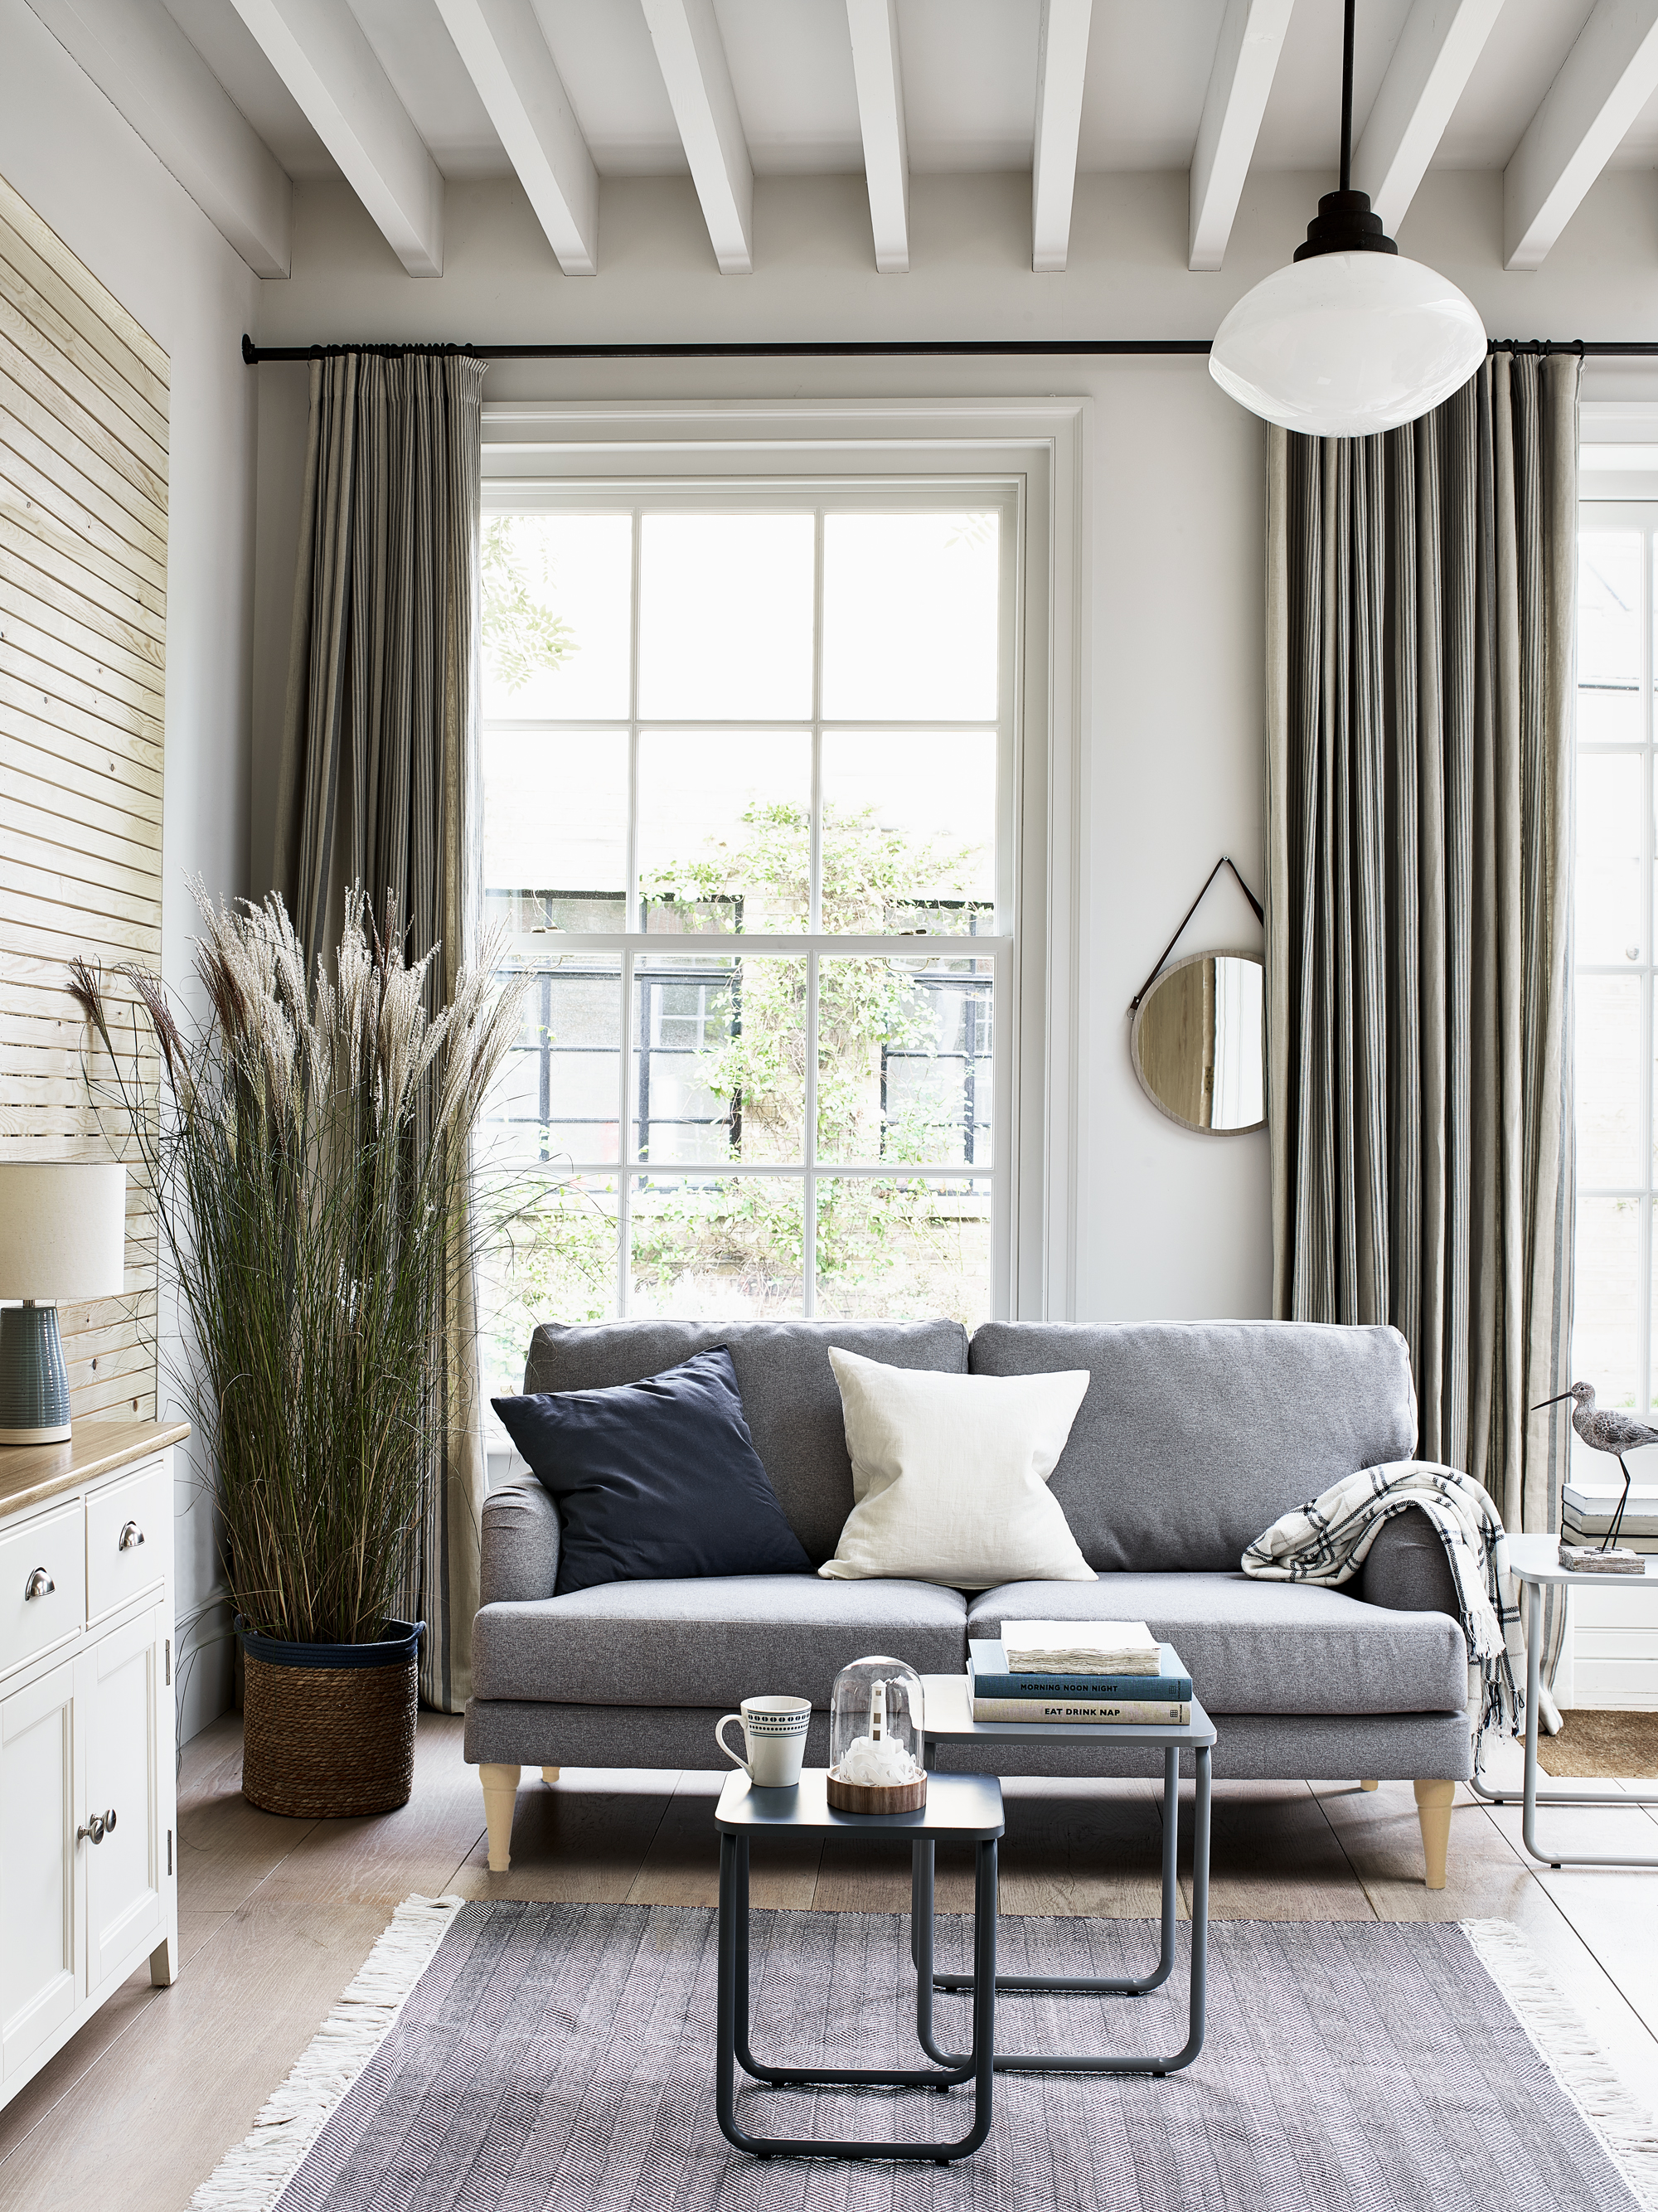 A living room with grey sofa, white beams on ceiling and sage-colored curtains by Argos